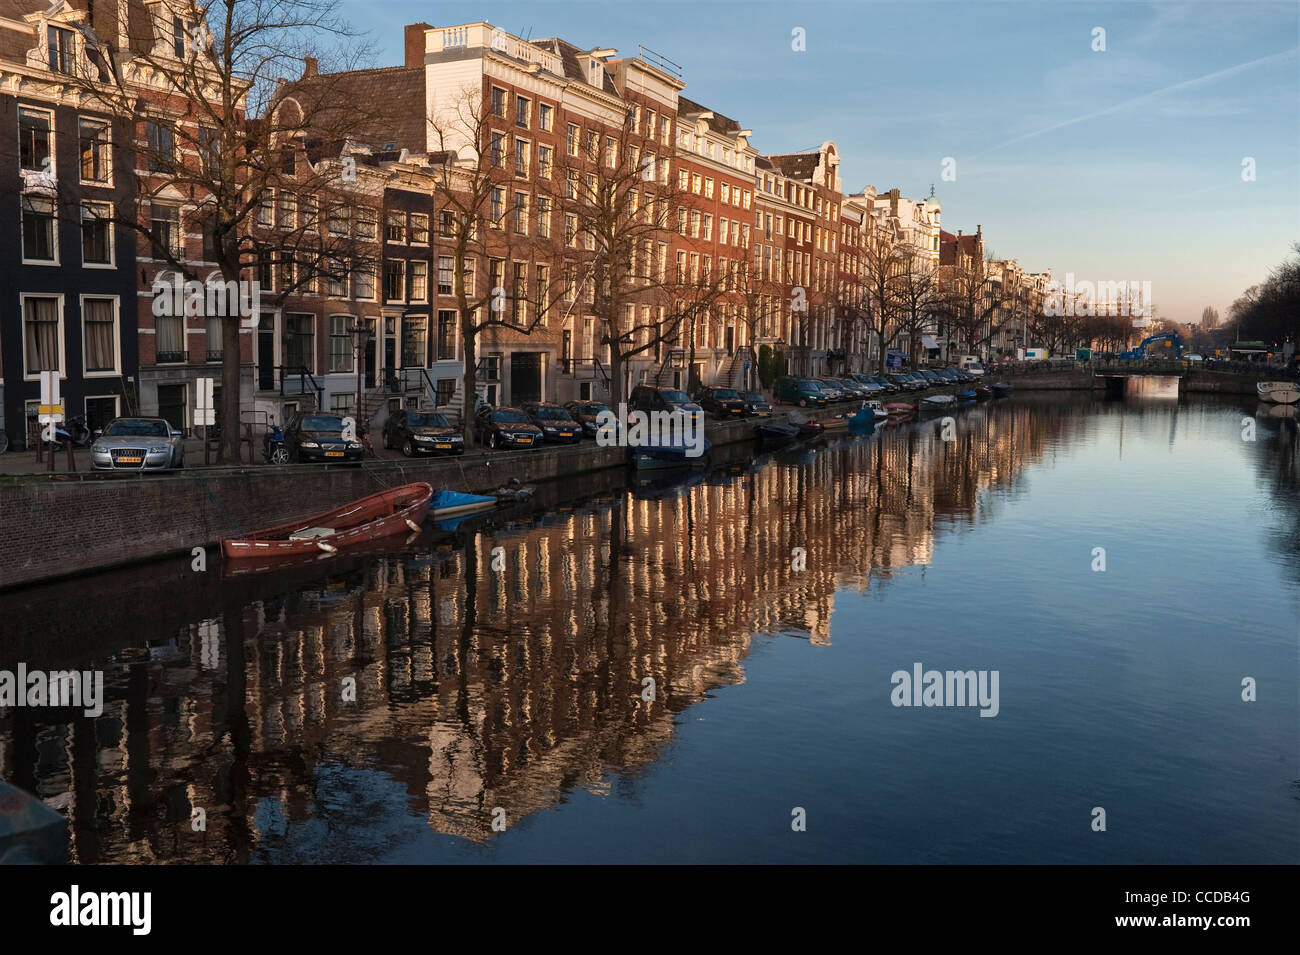 Houses reflected in the still water of the Keizersgracht canal on a quiet winter evening in Amsterdam, the Netherlands Stock Photo